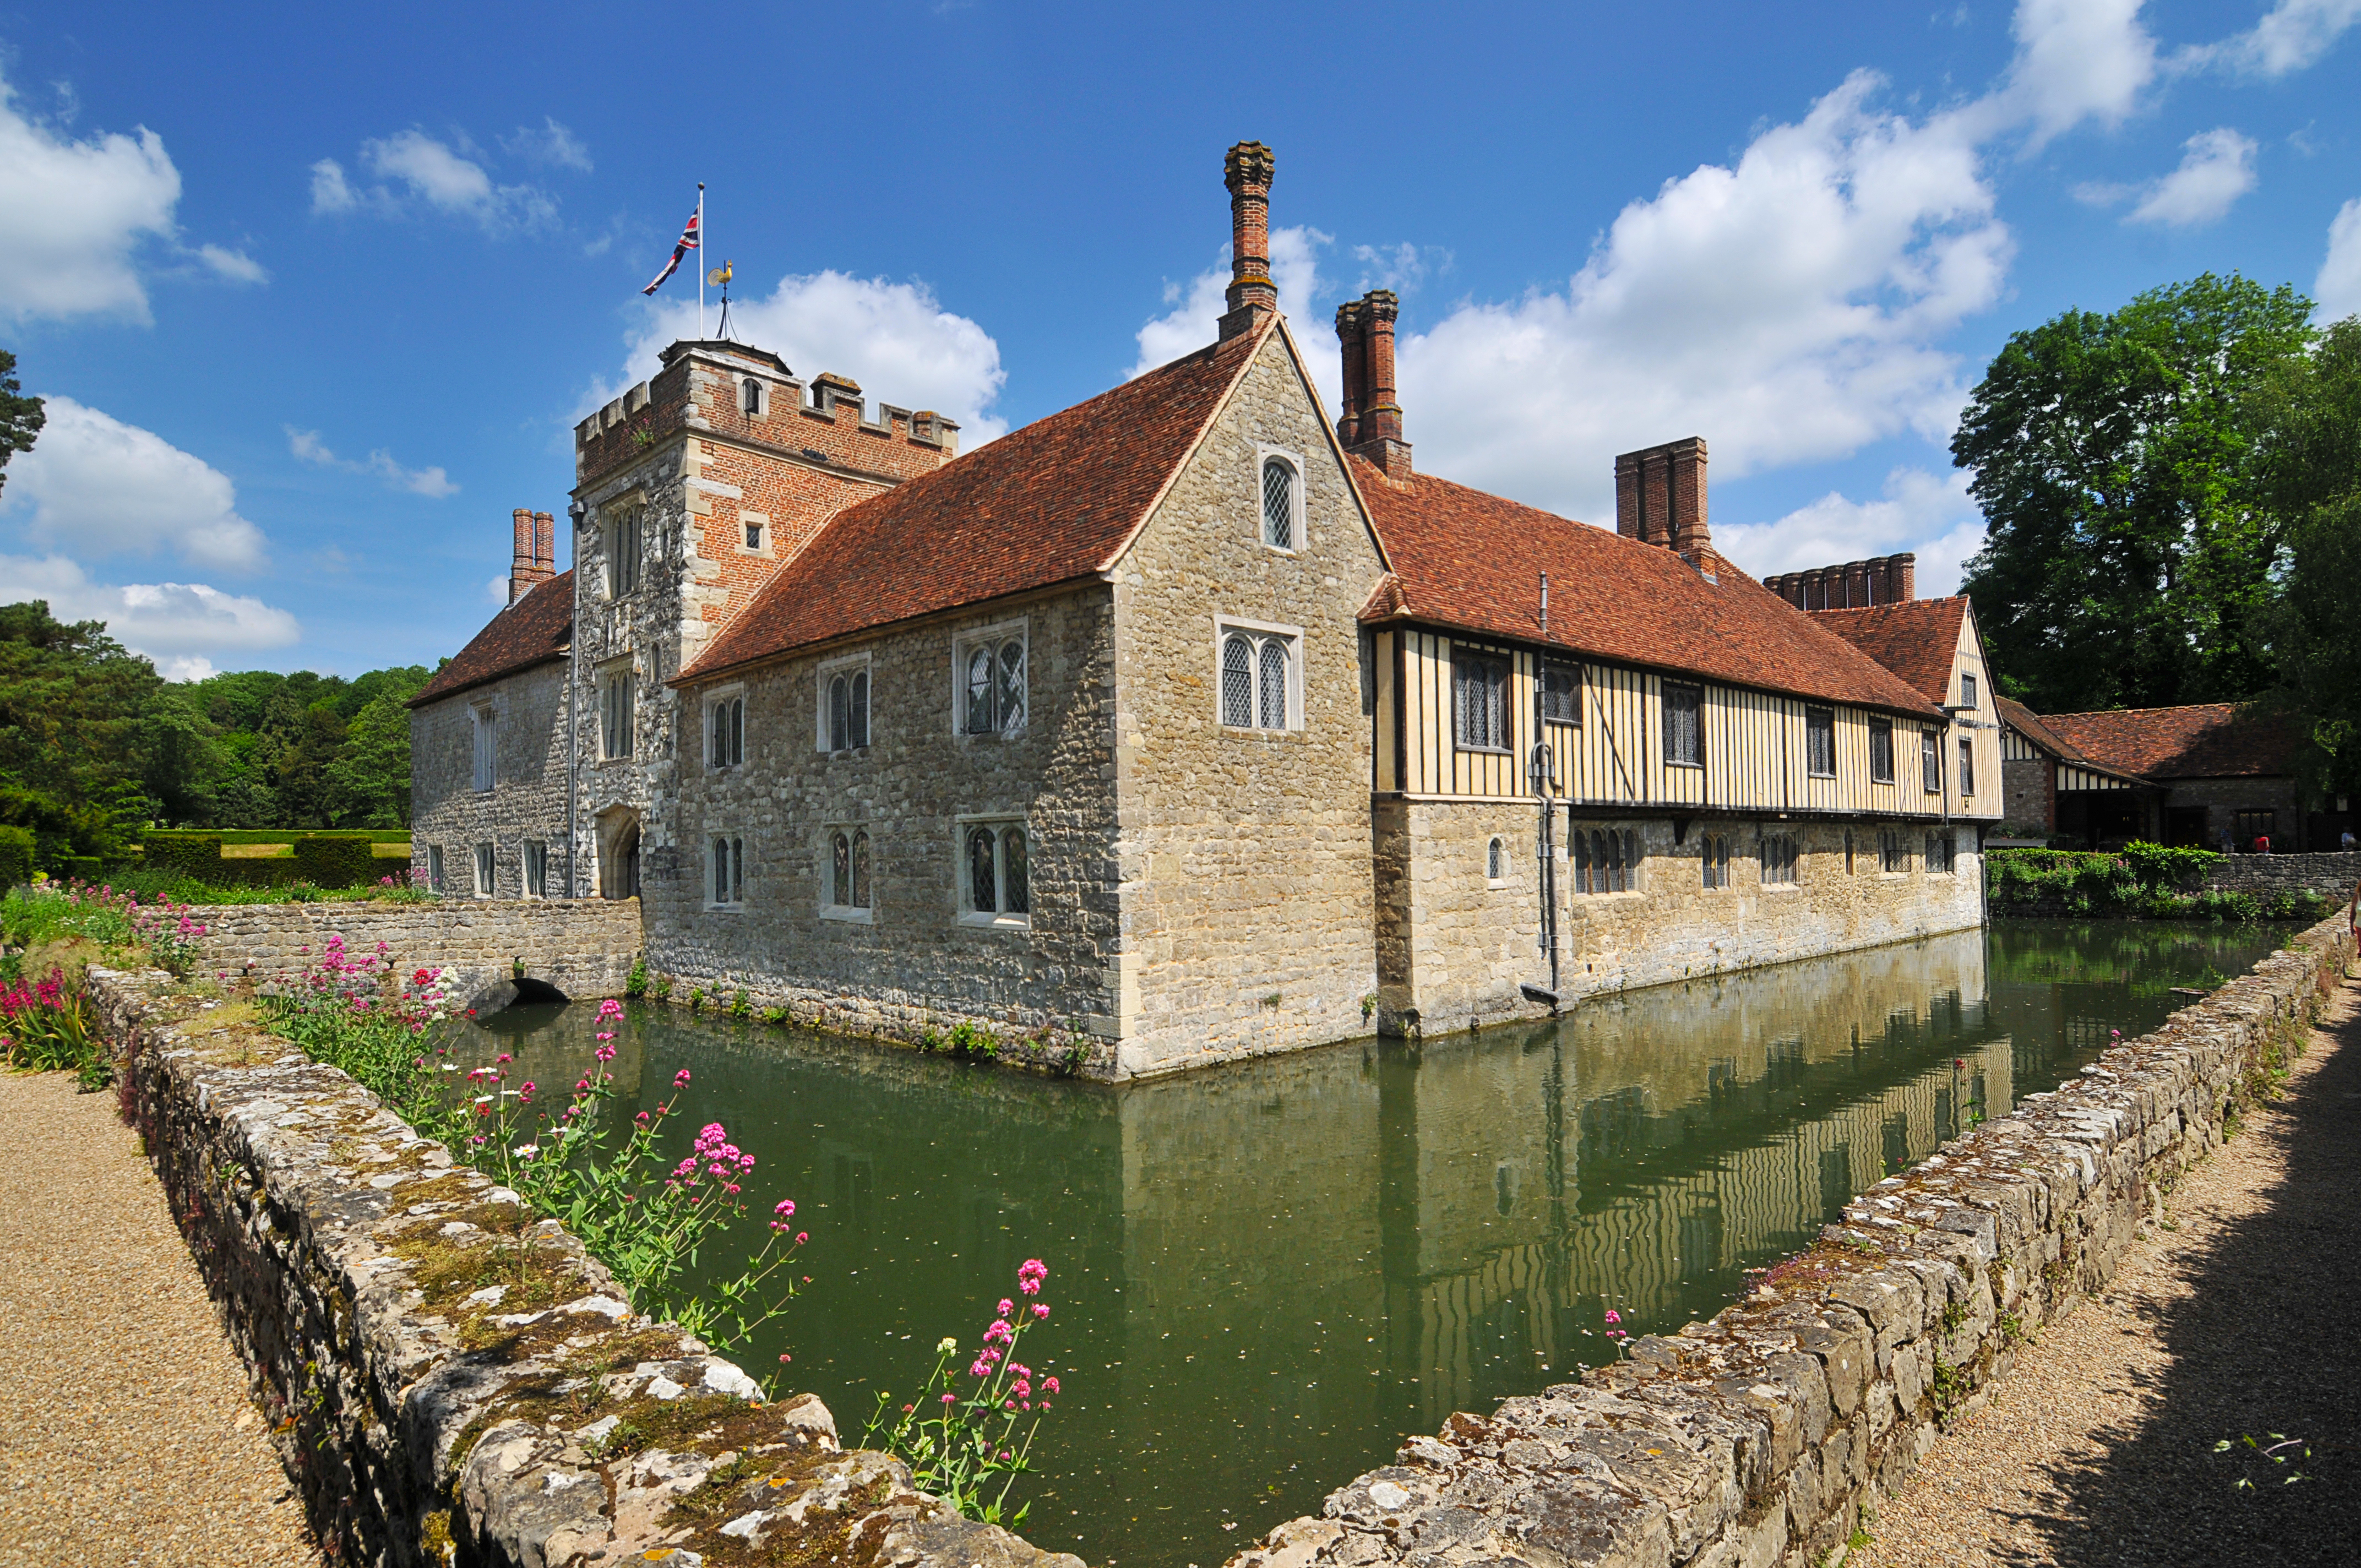 Ightham Mote was built back in the 14th century